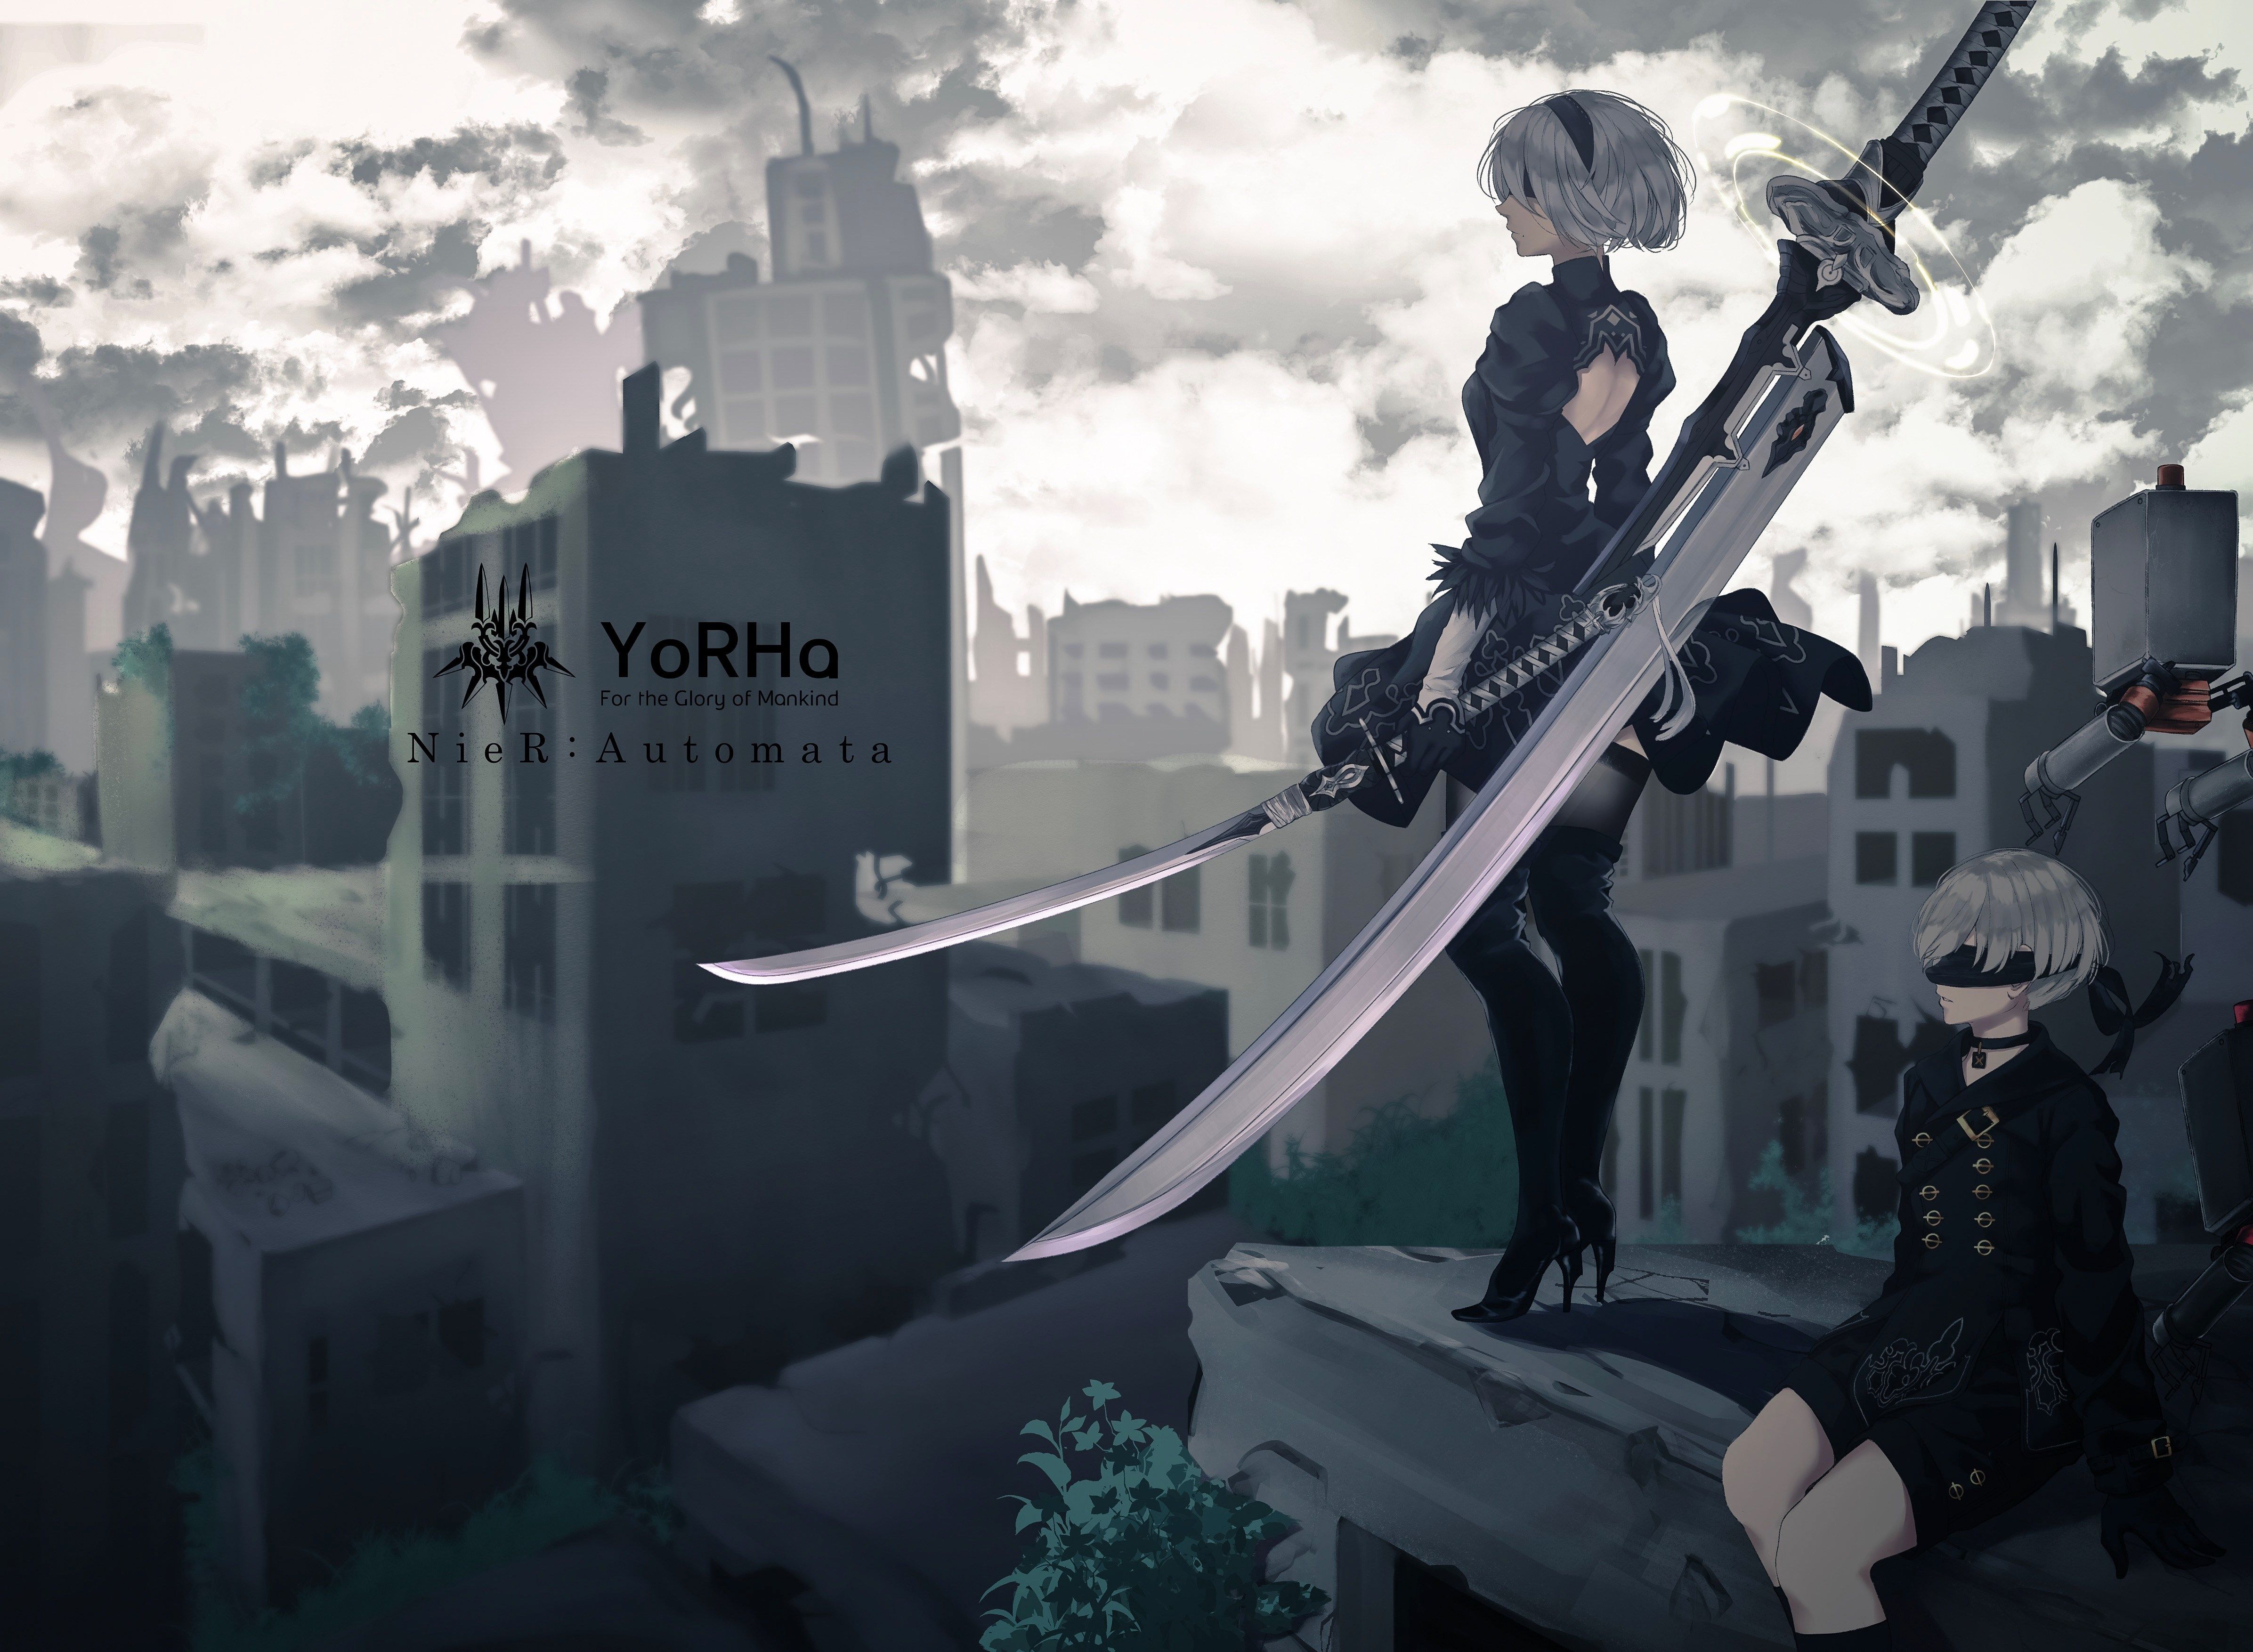 Background In High Quality automata. Automatas